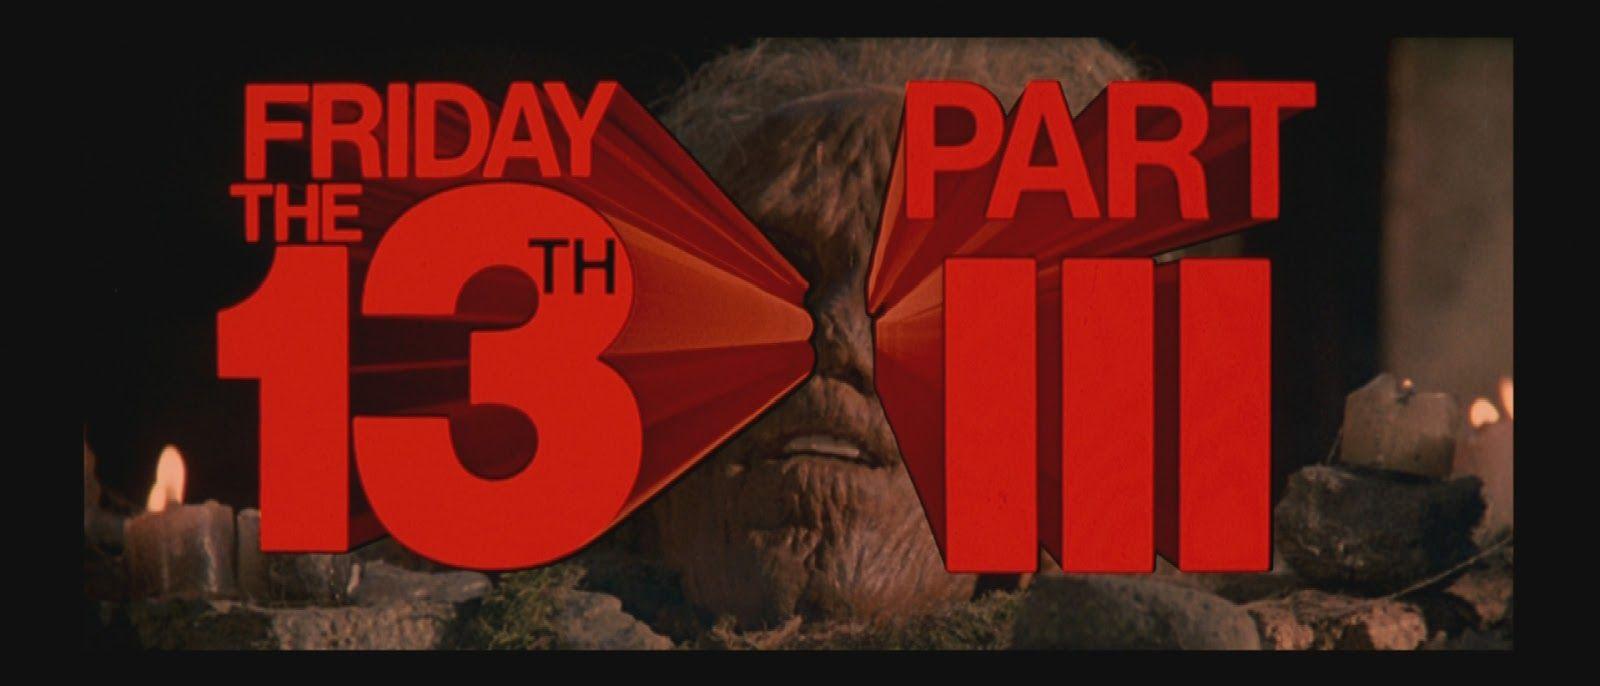 Friday the 13th Part 2 Logo - Making The Franchise: Friday The 13th Part 3 - Friday The 13th: The ...